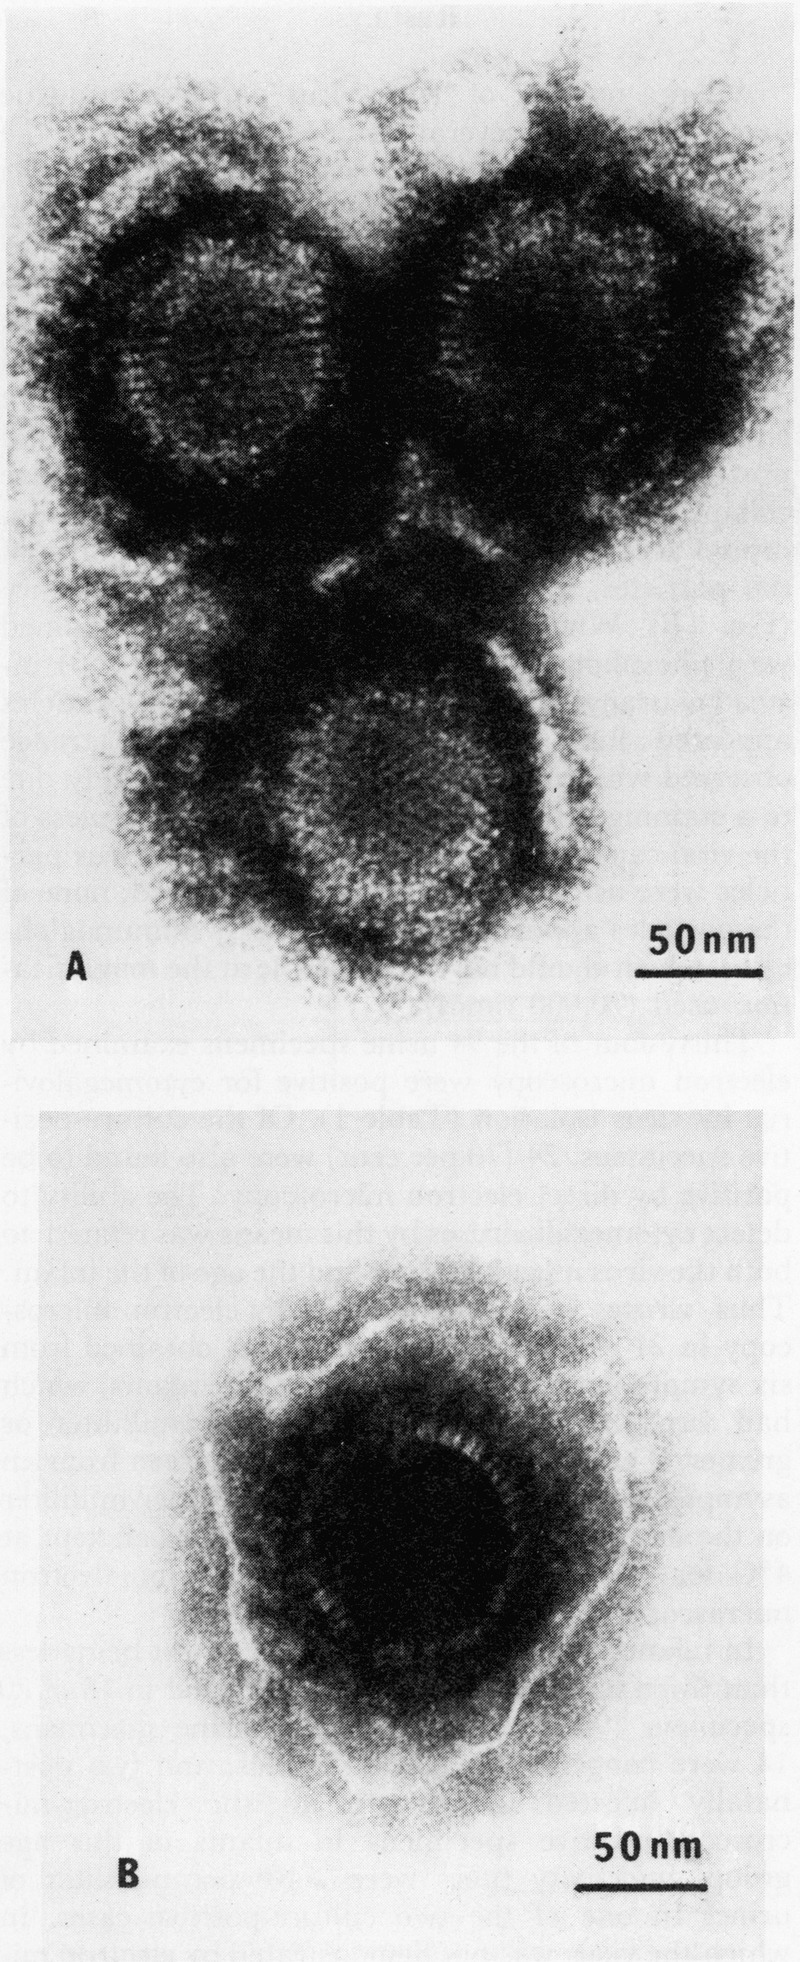 2 microscopic images arranged vertically. The top image is labeled 'A' and shows a downward facing triangular cluster of 3 black dissolving circles with lighter rings delineating slightly lighter dark gray centers. The bottom image is labeled 'B' and shows a single dissolving circle with a black center and a burst light outer surrounded by a gray aura of material that appears to be leaking from the center.